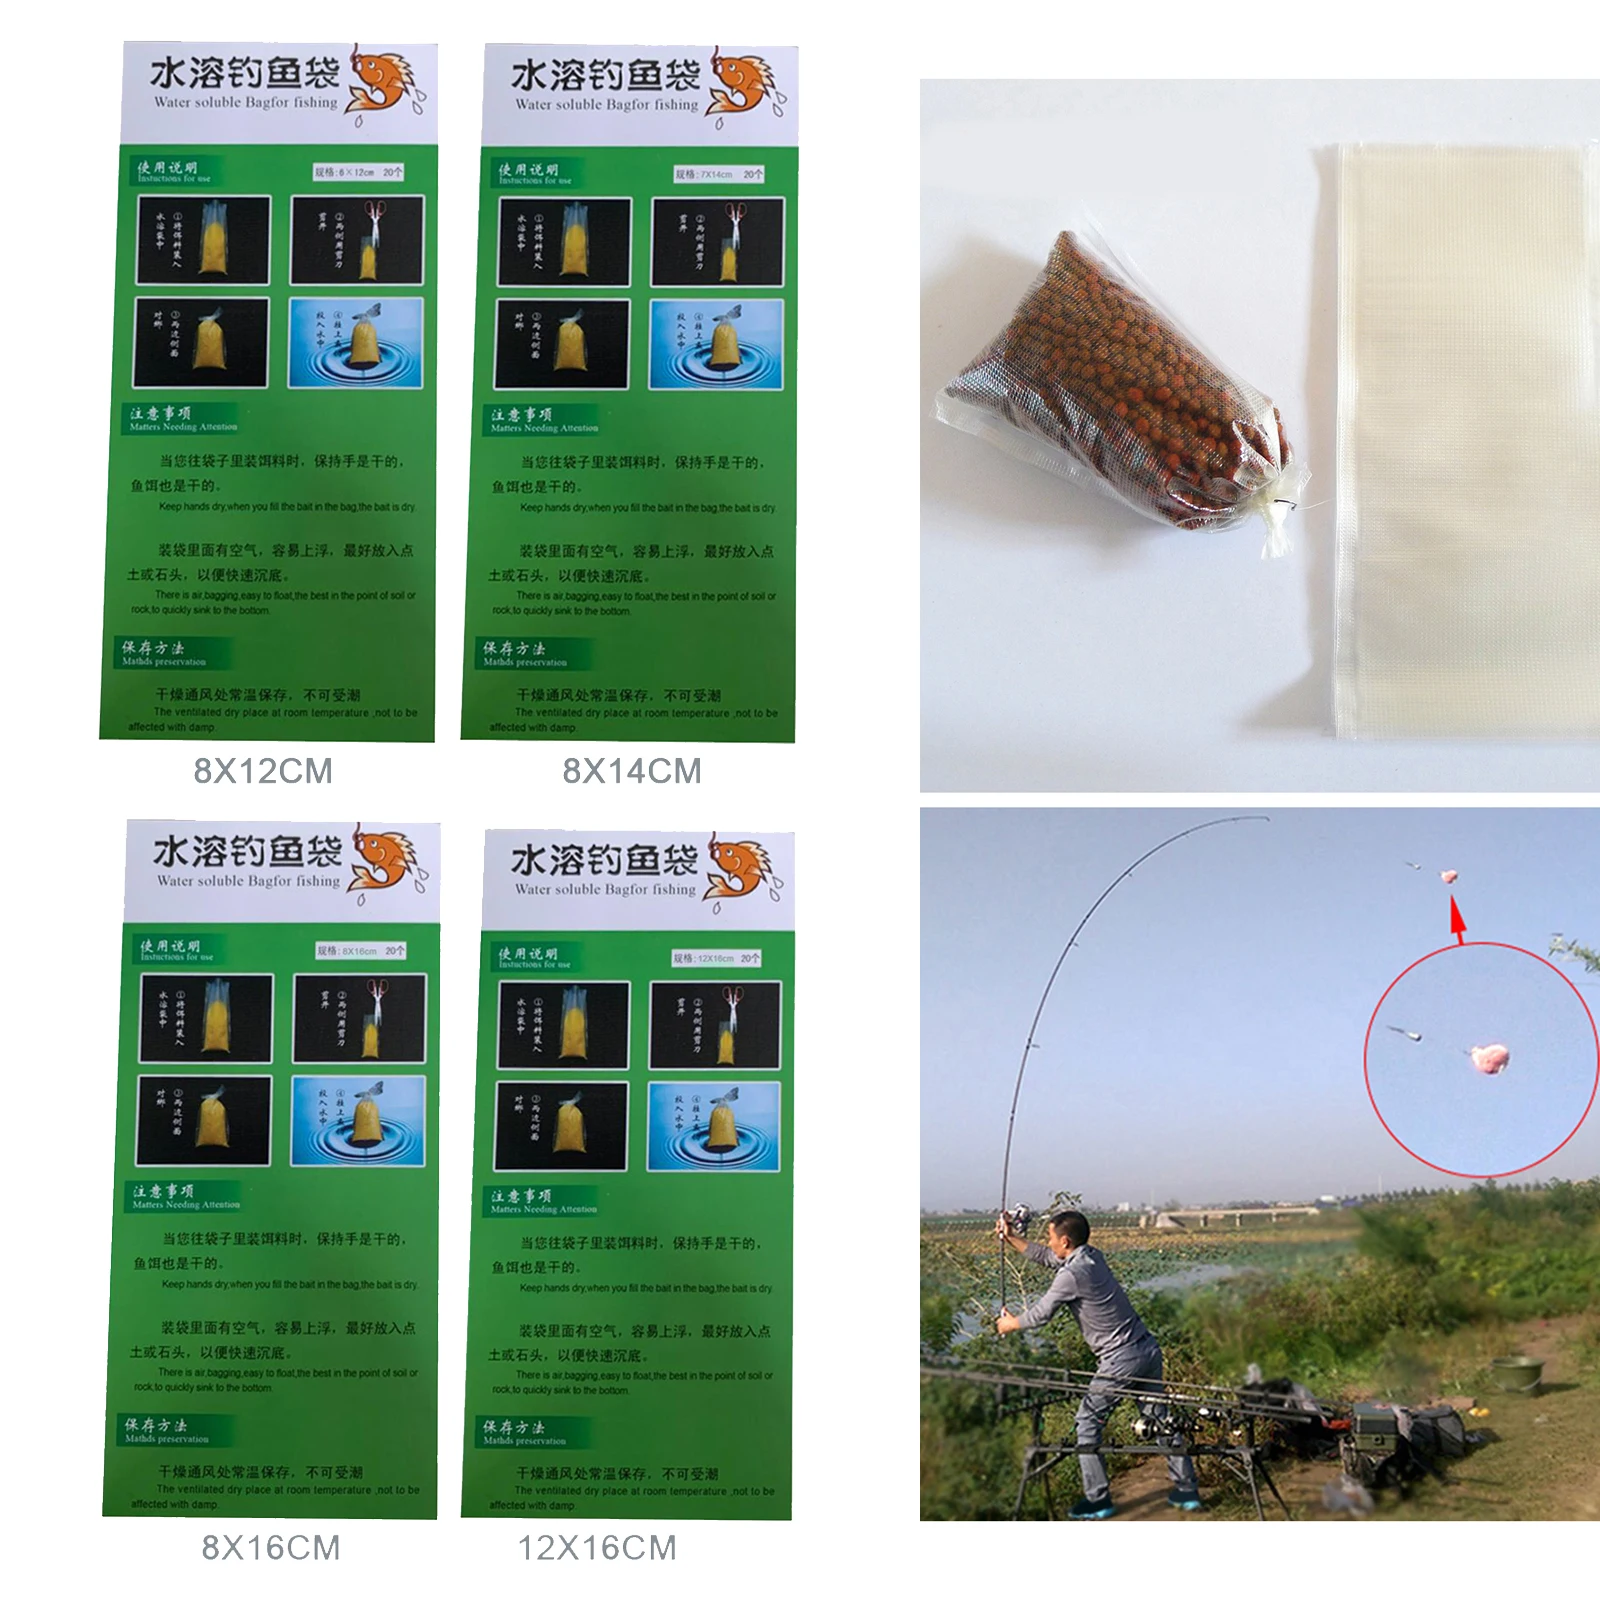 20Pcs PVA Water Dissolving Mesh Bag Fishing Tackle Quick Water Soluble Solid Bait Bags for Bait Throwing